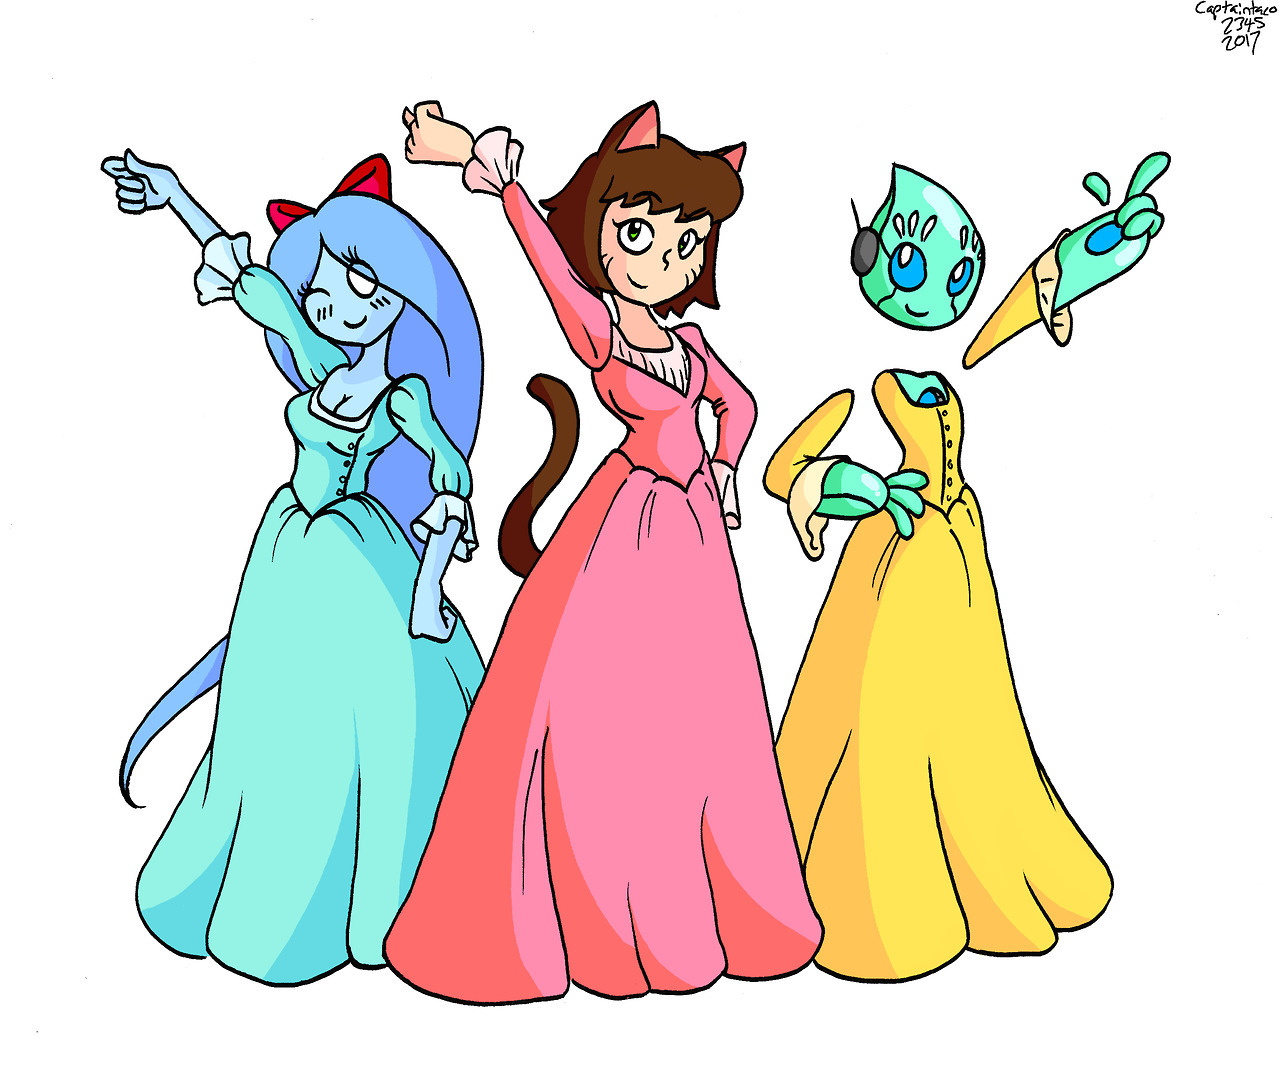 Abby, Yuko, and Andromeda dressed as the Schuyler Sisters from Hamilton. Not sure